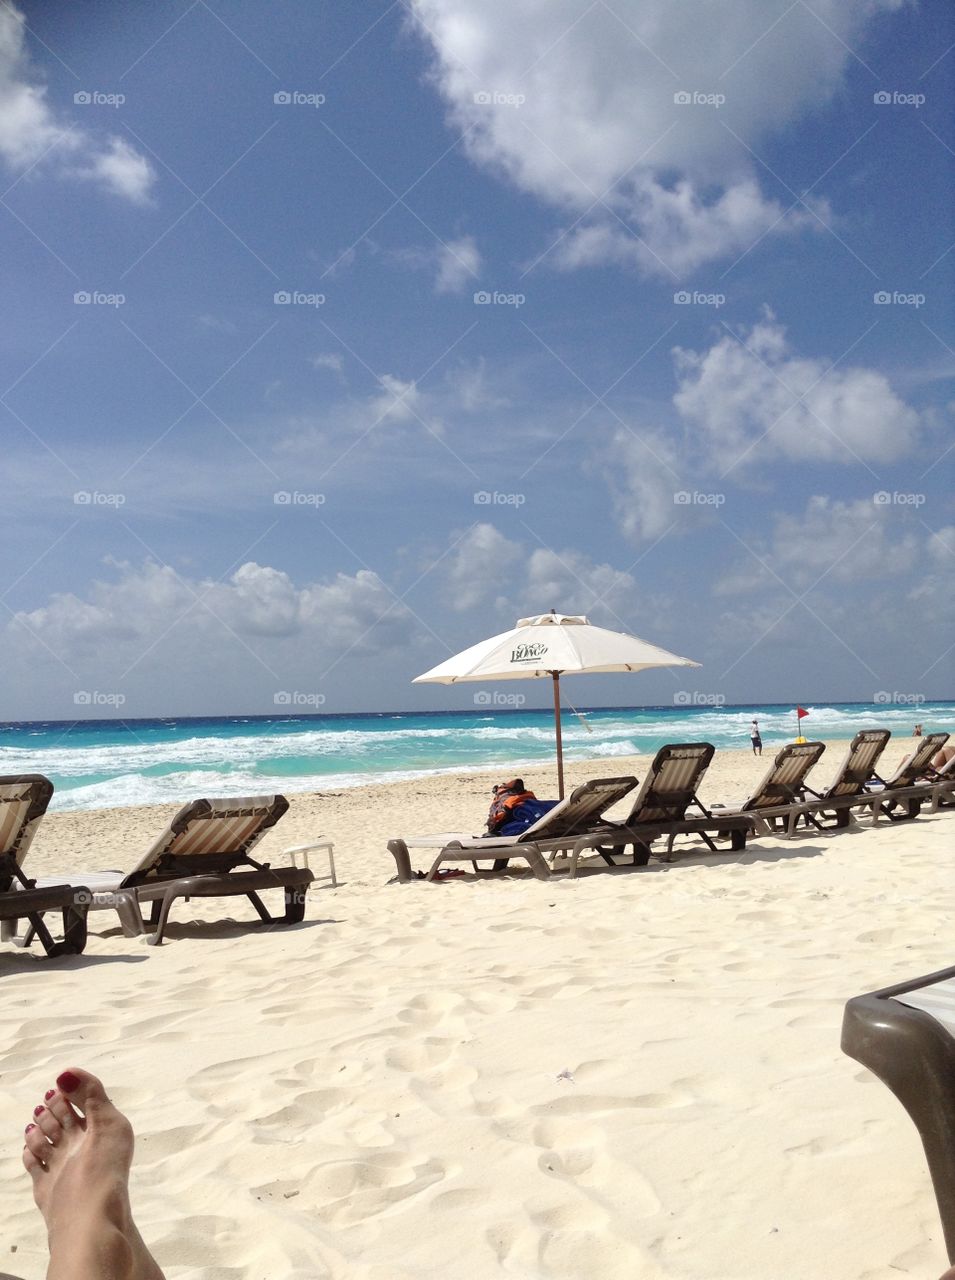 
view of the beach with white sand and blue sea, beach umbrellas and sun loungers. Mexico, Cancun, the Caribbean Sea.